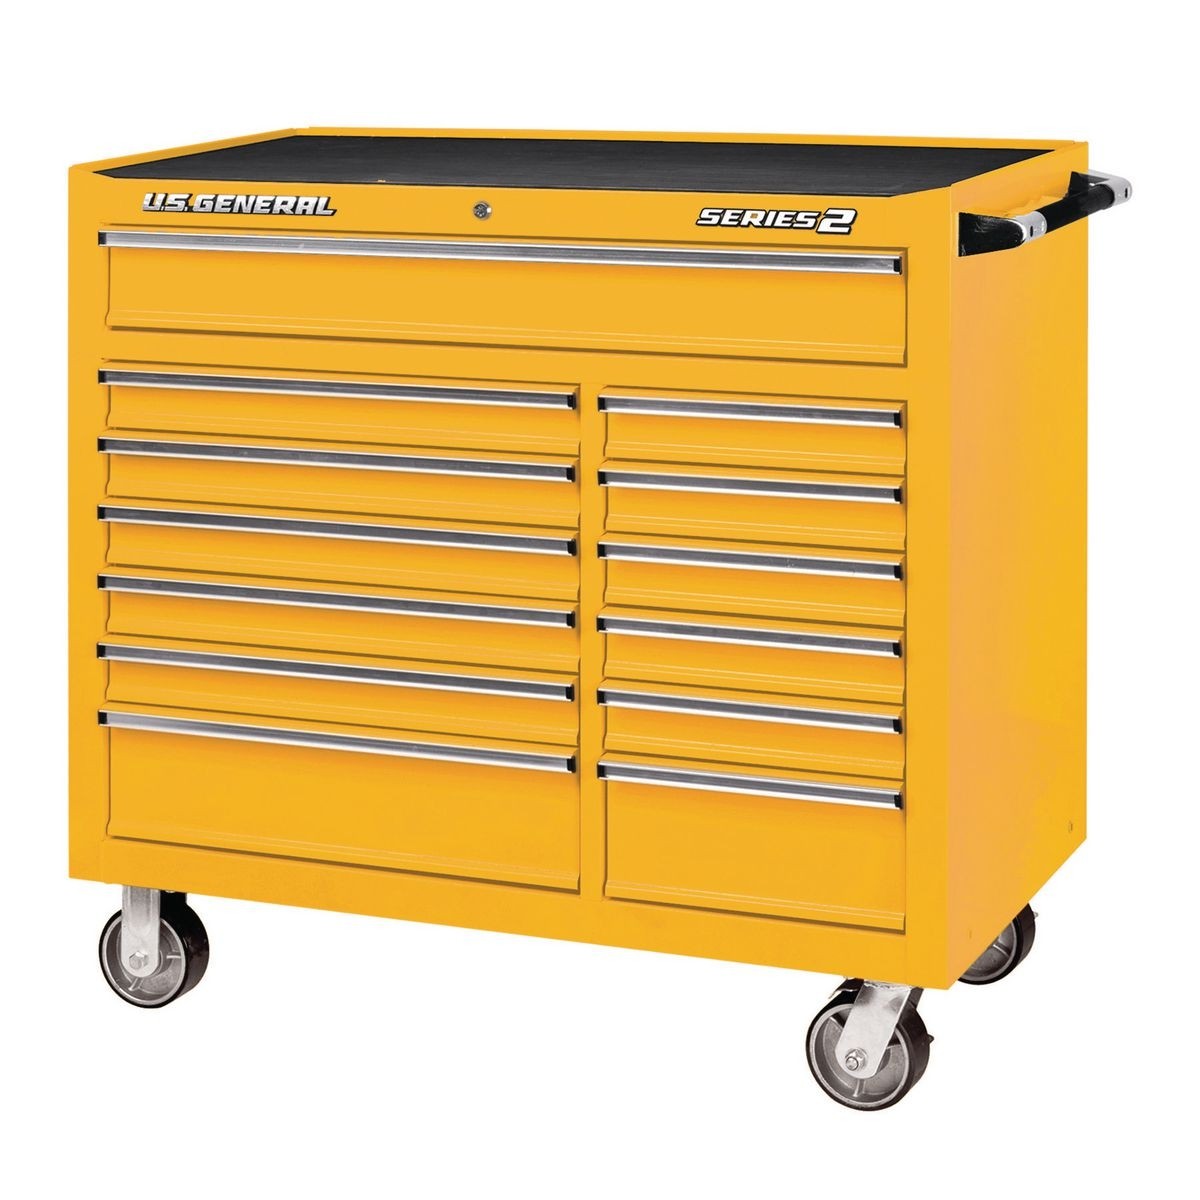 U.S. GENERAL 44 In. X 22 In. Double Bank Roller Cabinet – Yellow – Item 64956